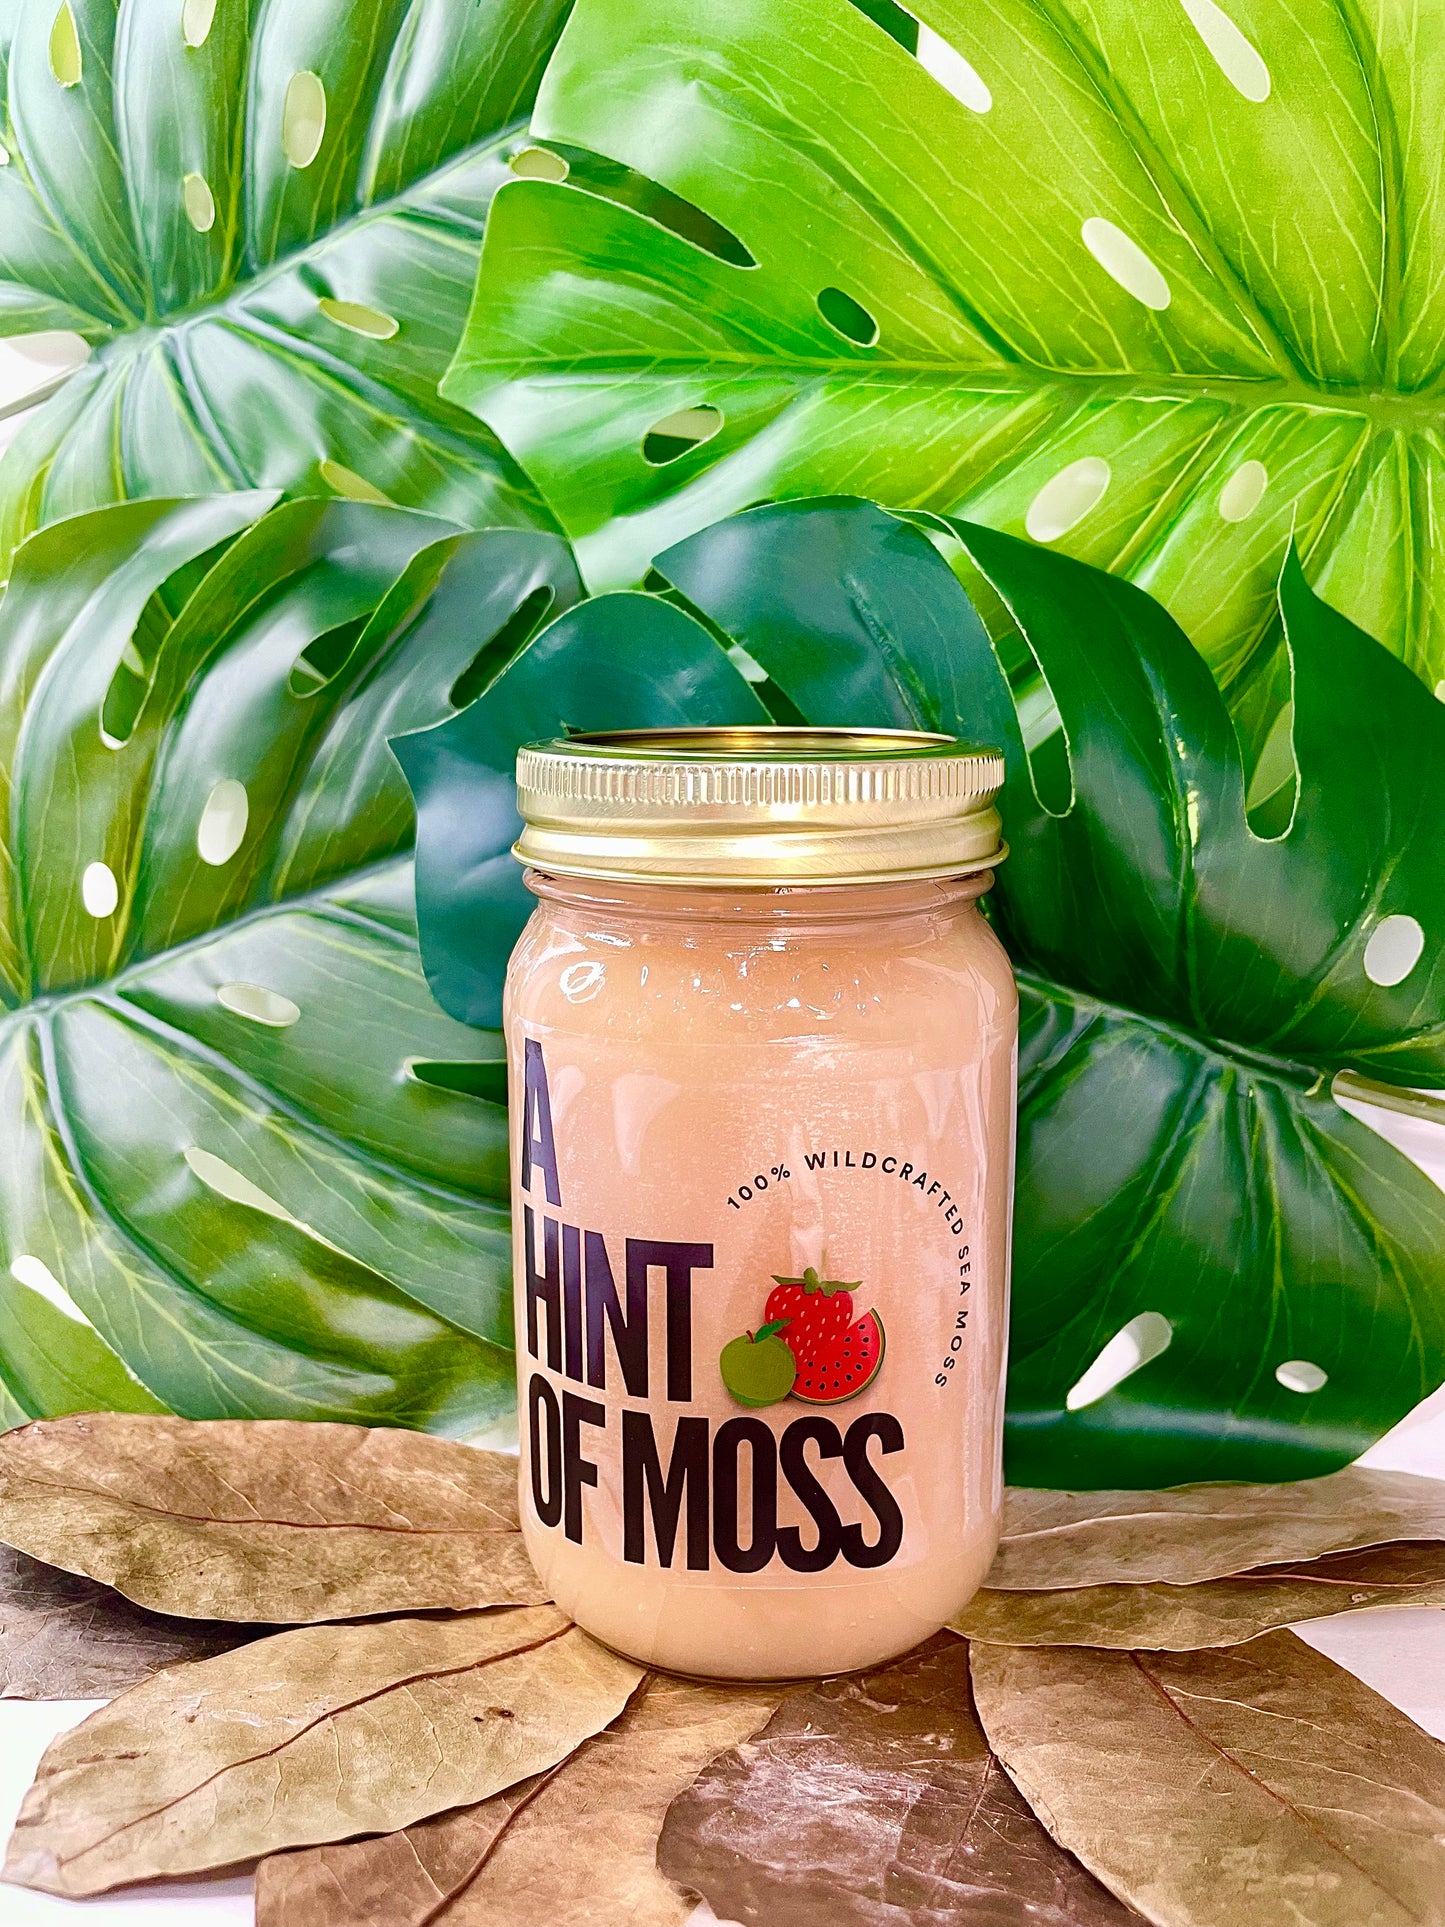 Sour Sop Leaf (Herbal Infusion) Sea Moss